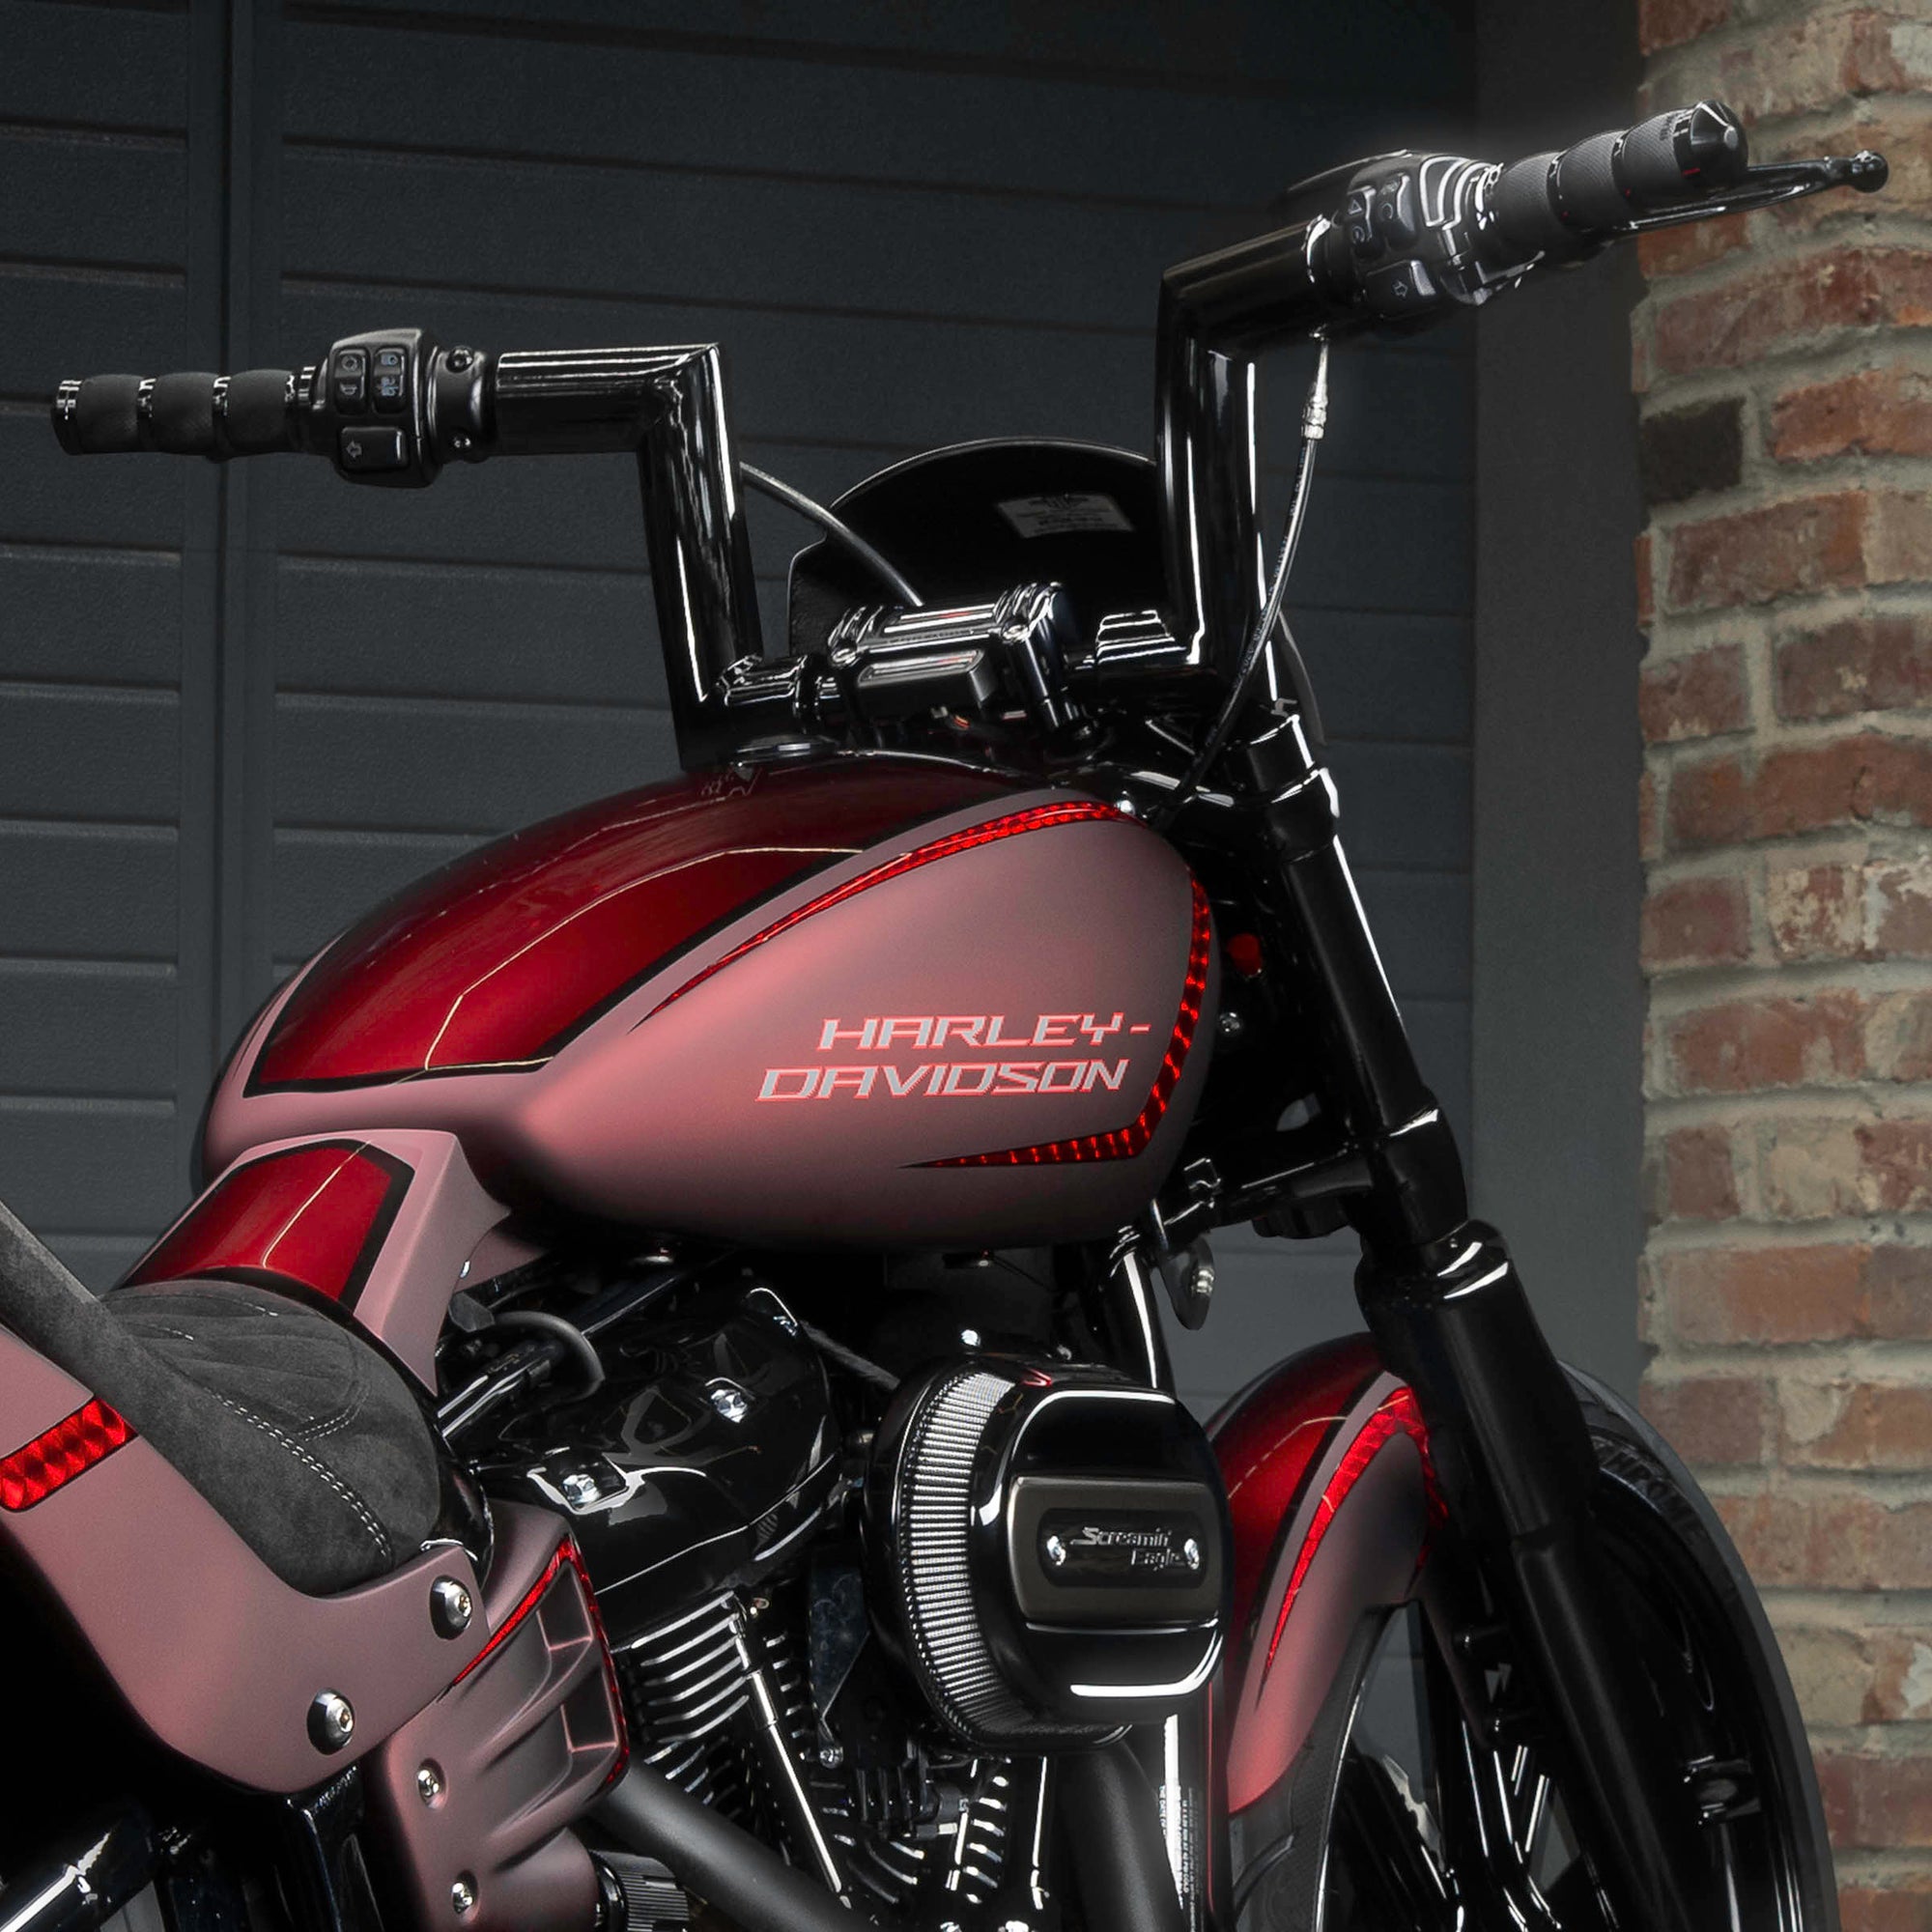 Zoomed Harley Davidson motorcycle with Killer Custom parts from the rear in a modern garage